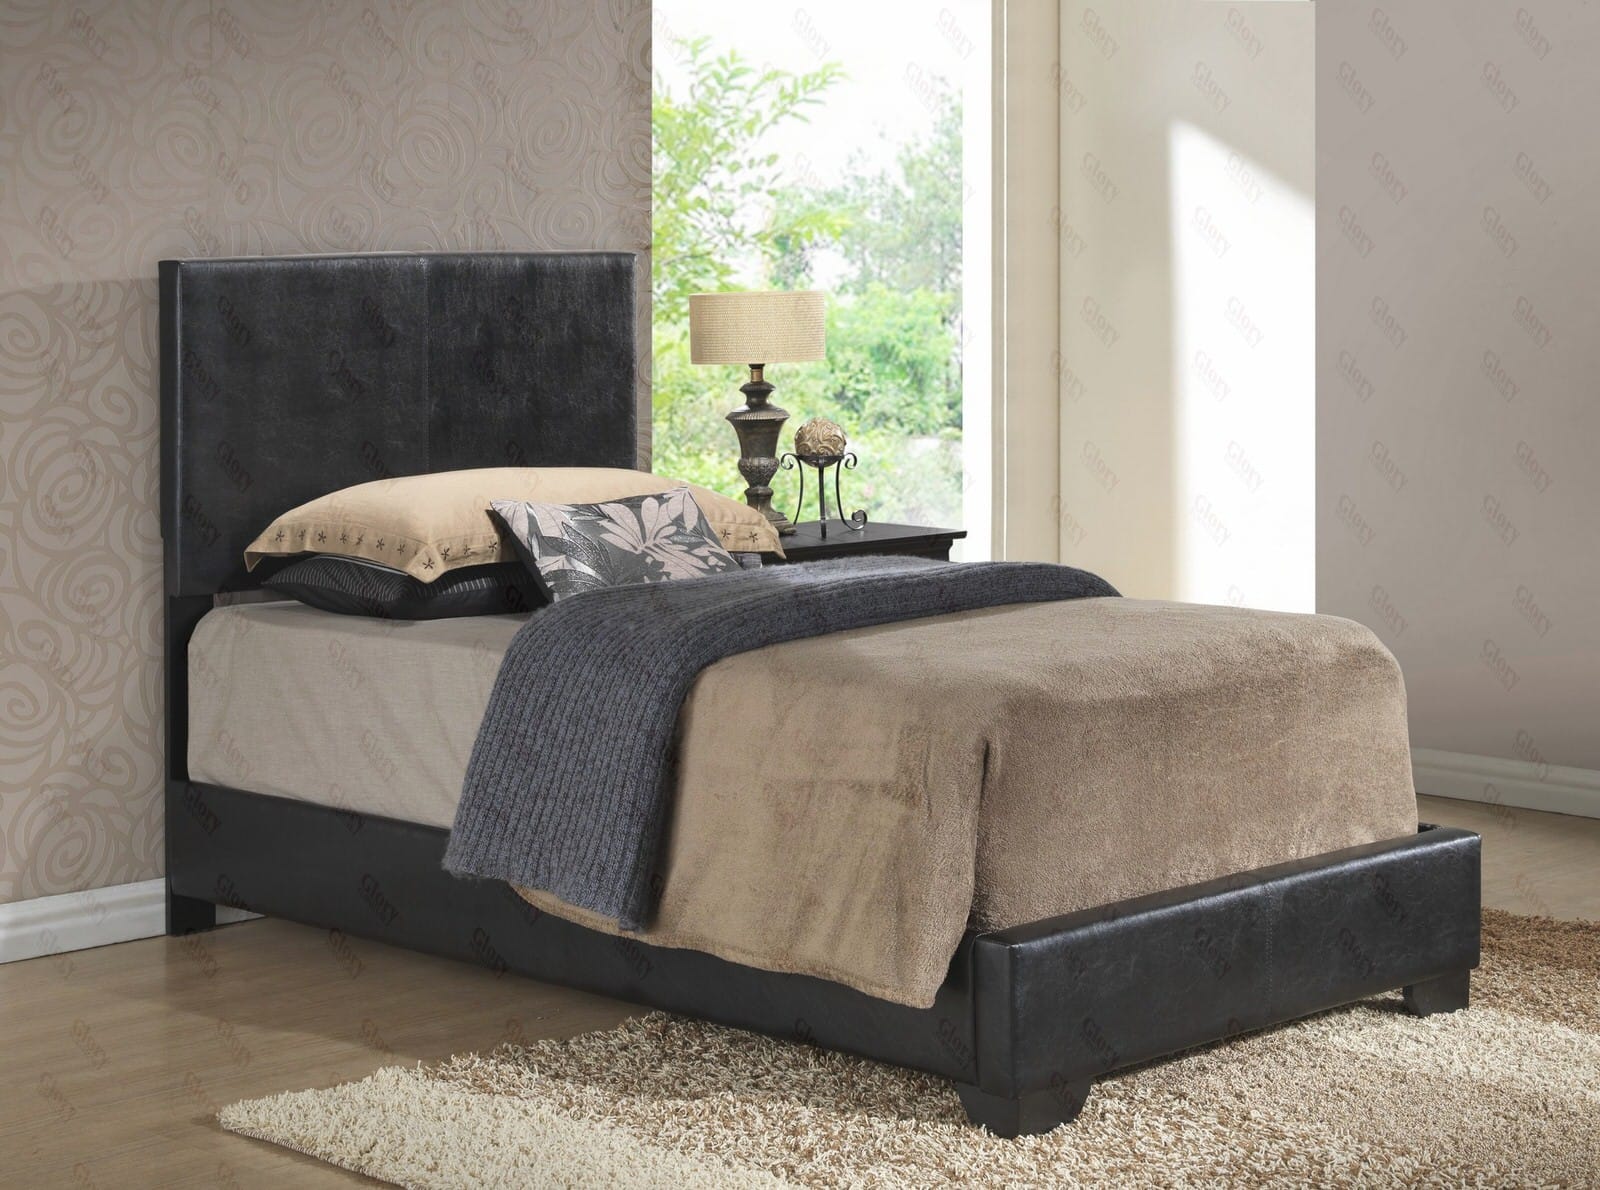 Nyc Deal Twin Upholstered Bed With Mattress Set Free Delivery In Nyc